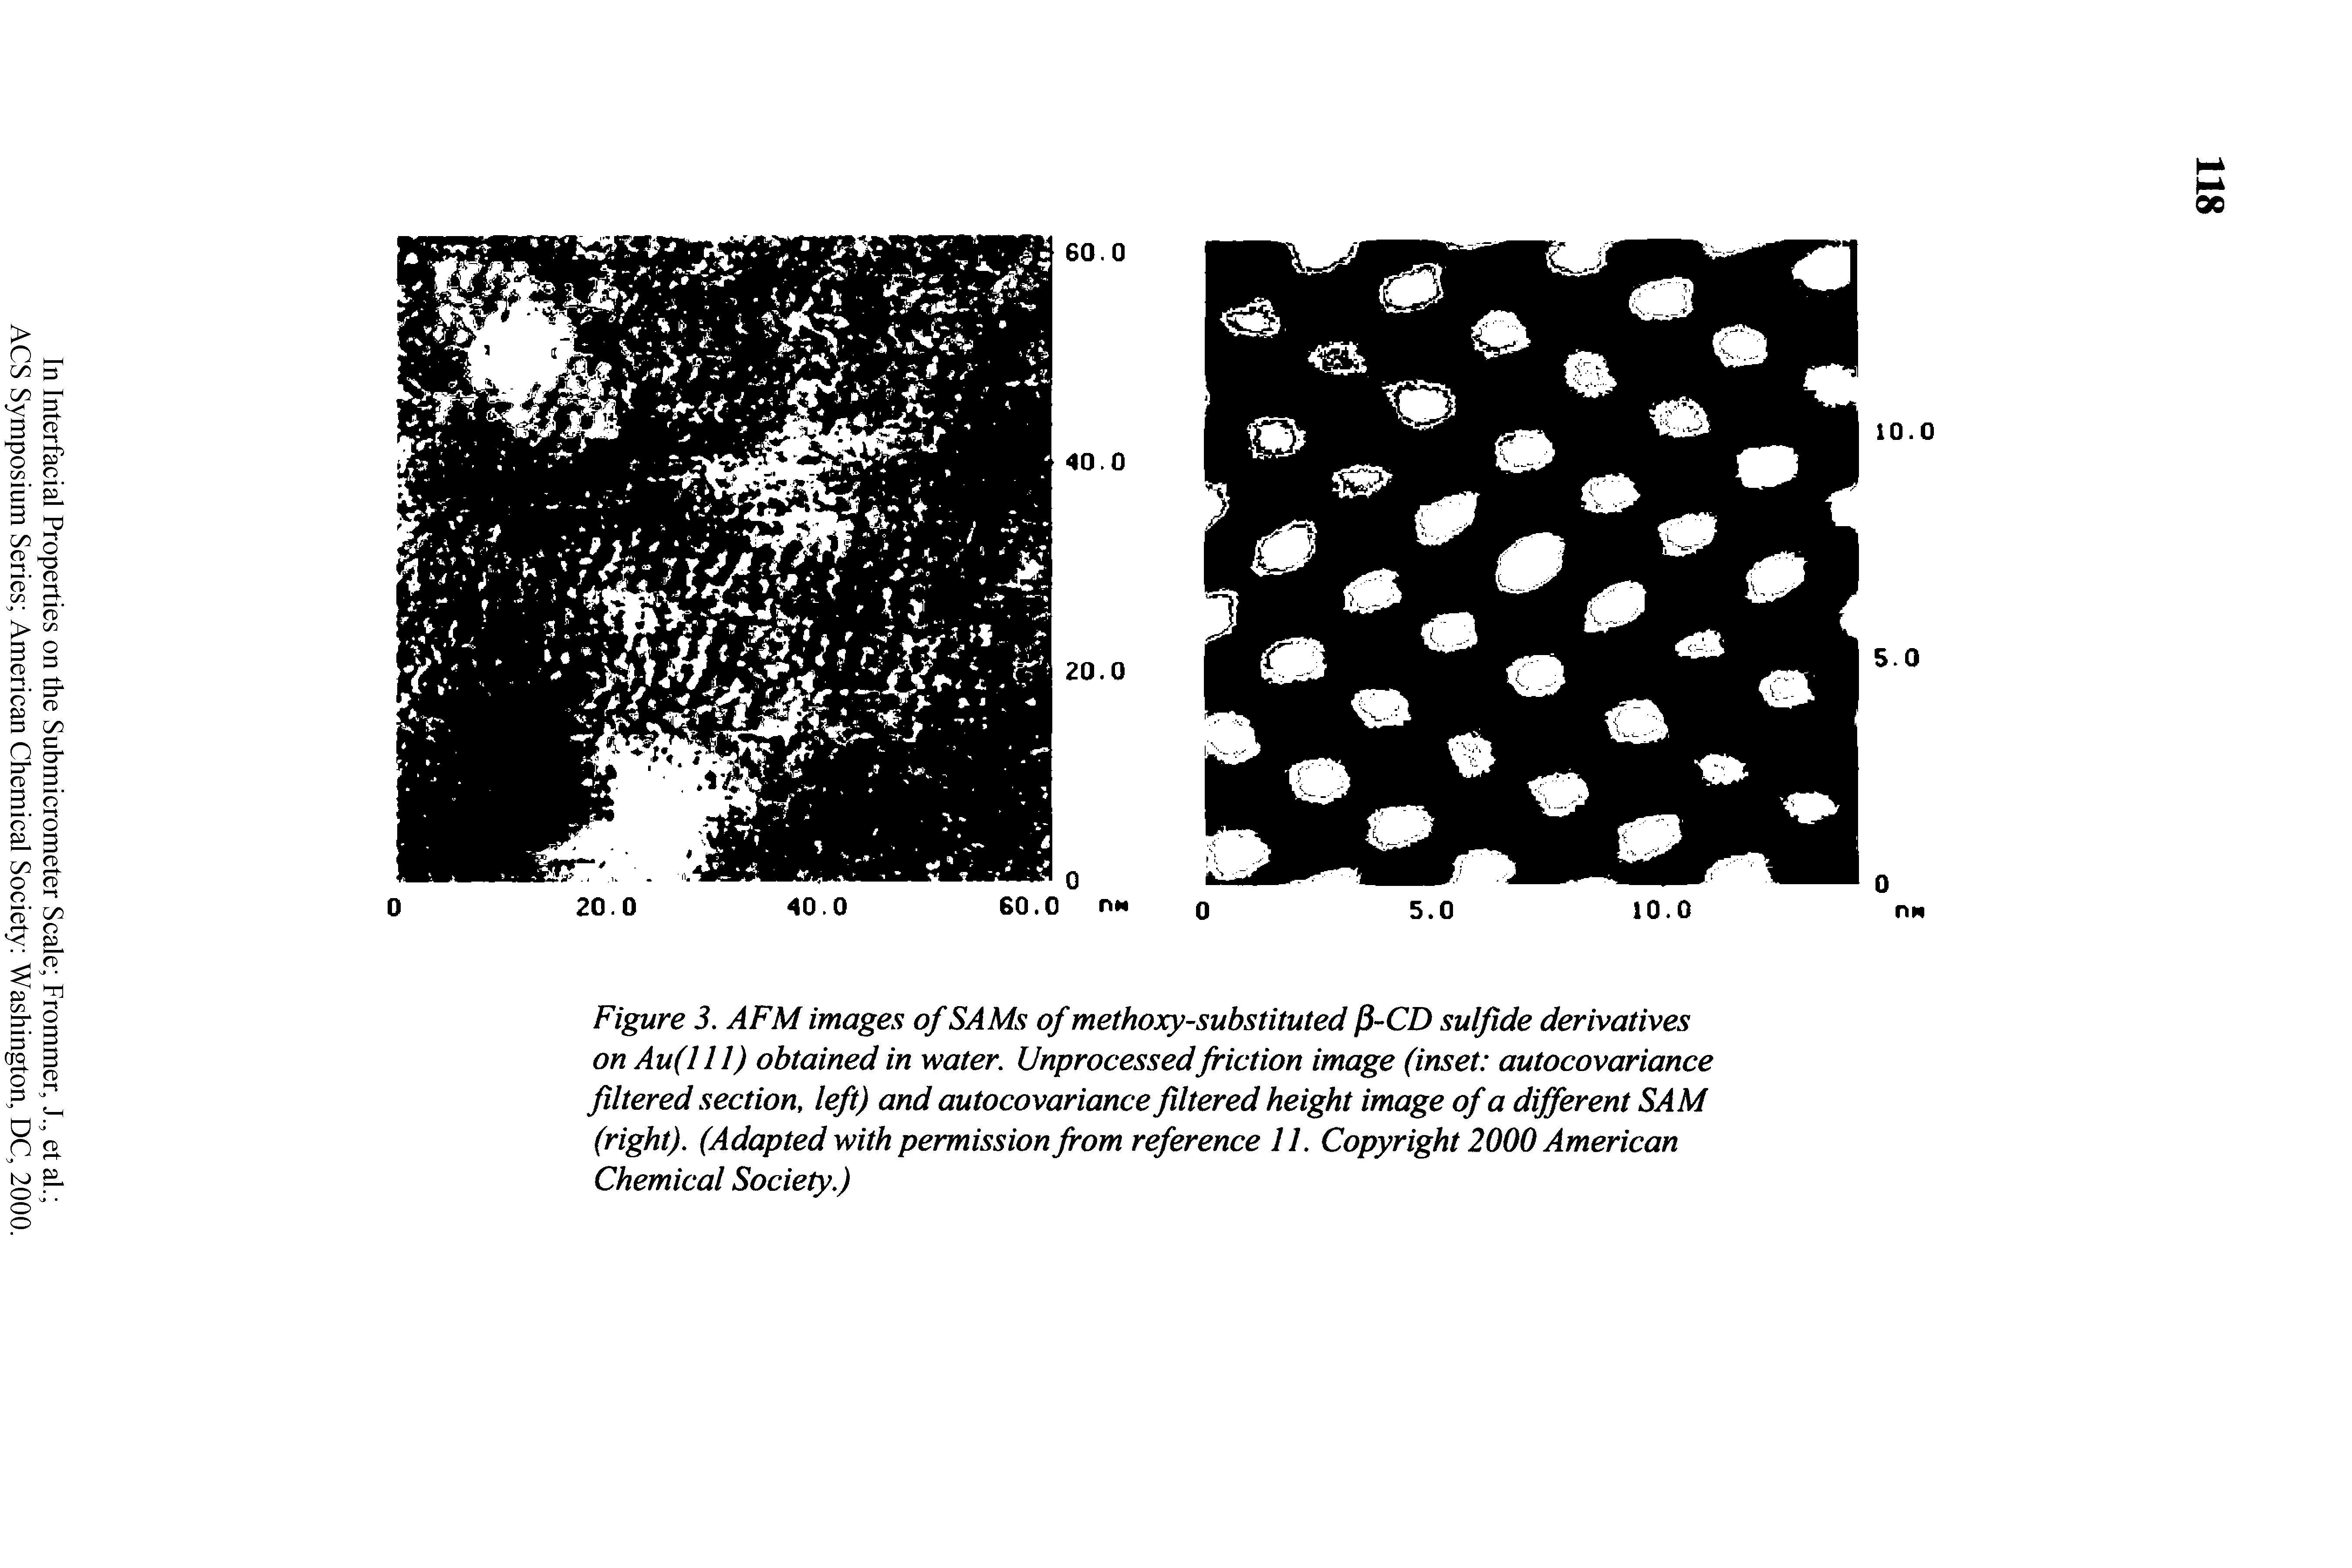 Figure 3, AFM images of SAMs of methoxy-substituted p-CD sulfide derivatives on Au(l 11) obtained in water. Unprocessedfriction image (inset autocovariance filtered section, left) and autocovariance filtered height image of a different SAM (right). (Adapted with permission from reference 11. Copyright 2000 American Chemical Society.)...